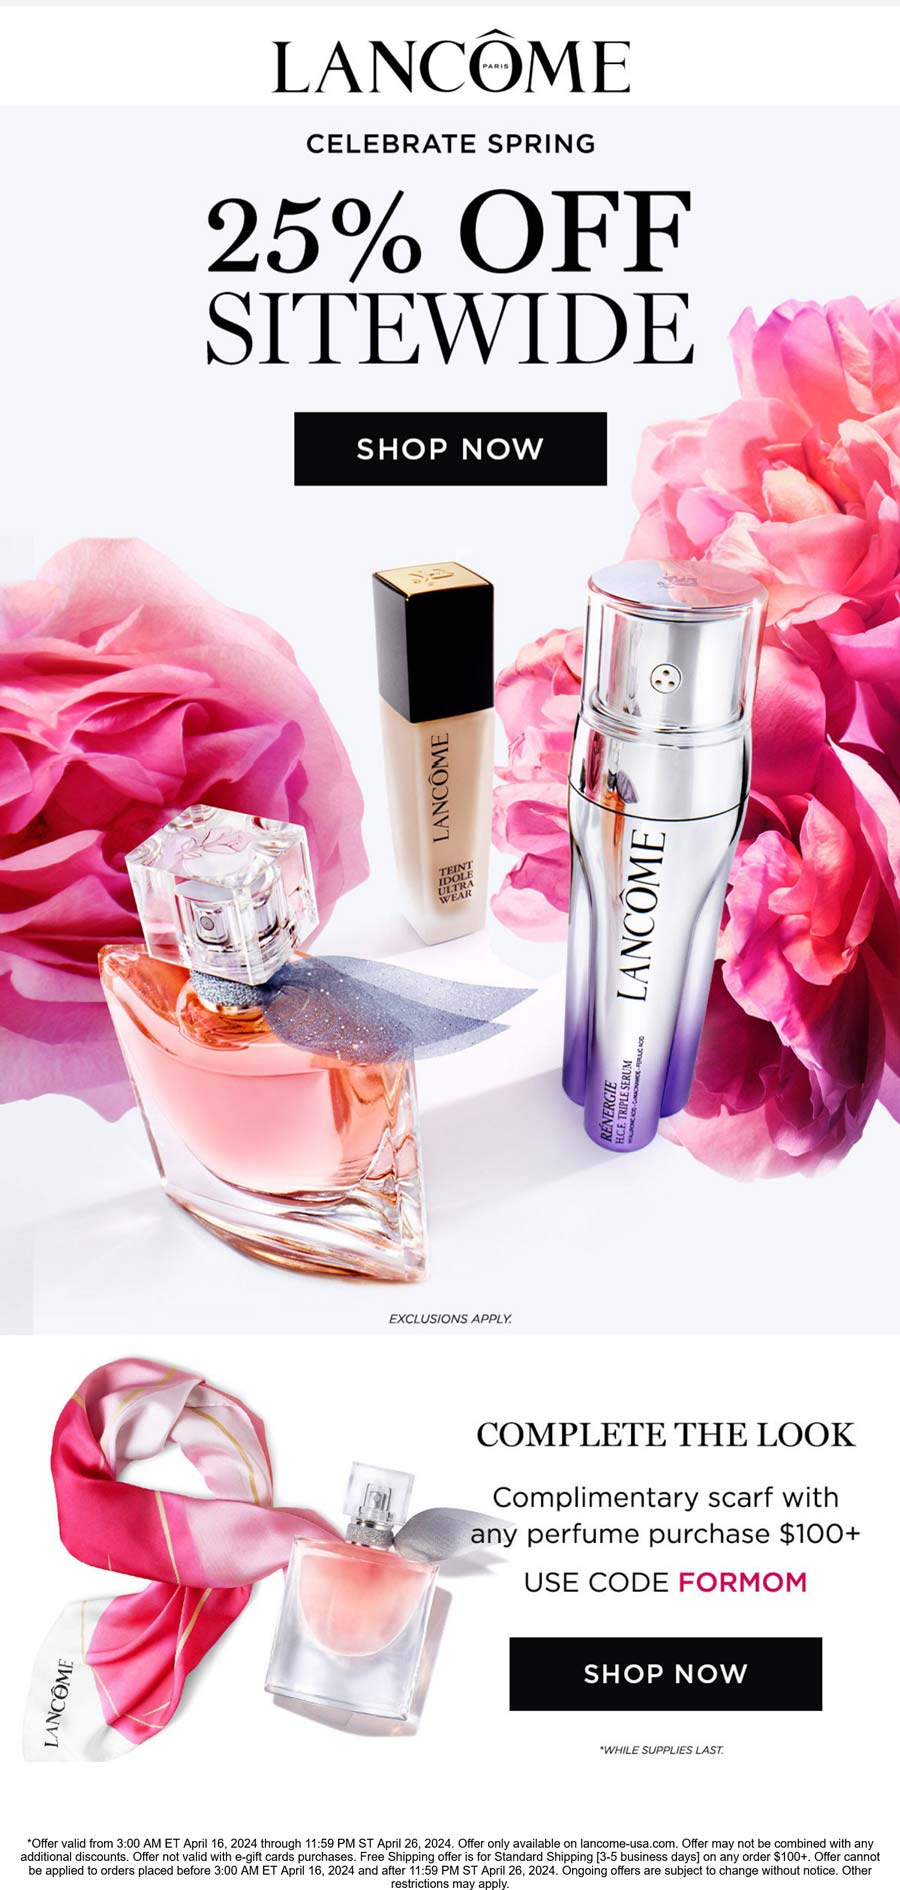 Lancome stores Coupon  25% off everything + free scarf on perfume purchase online at Lancome via promo code FORMOM #lancome 